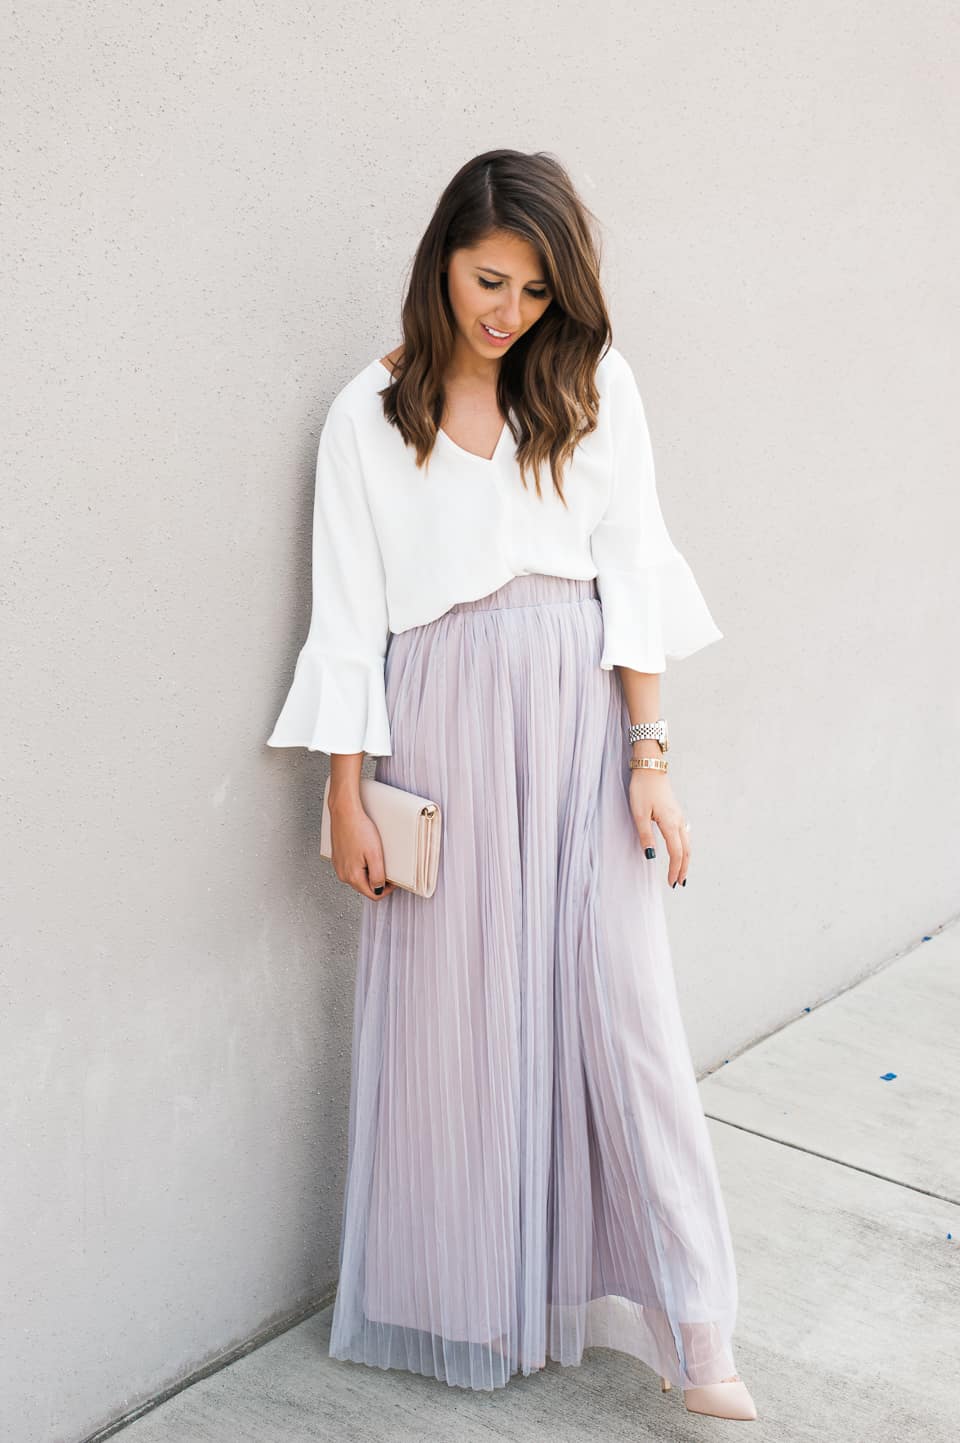 Dress Up Buttercup // A Houston-based fashion and inspiration blog developed to daily inspire your own personal style by Dede Raad | Tulle Maxi Skirt